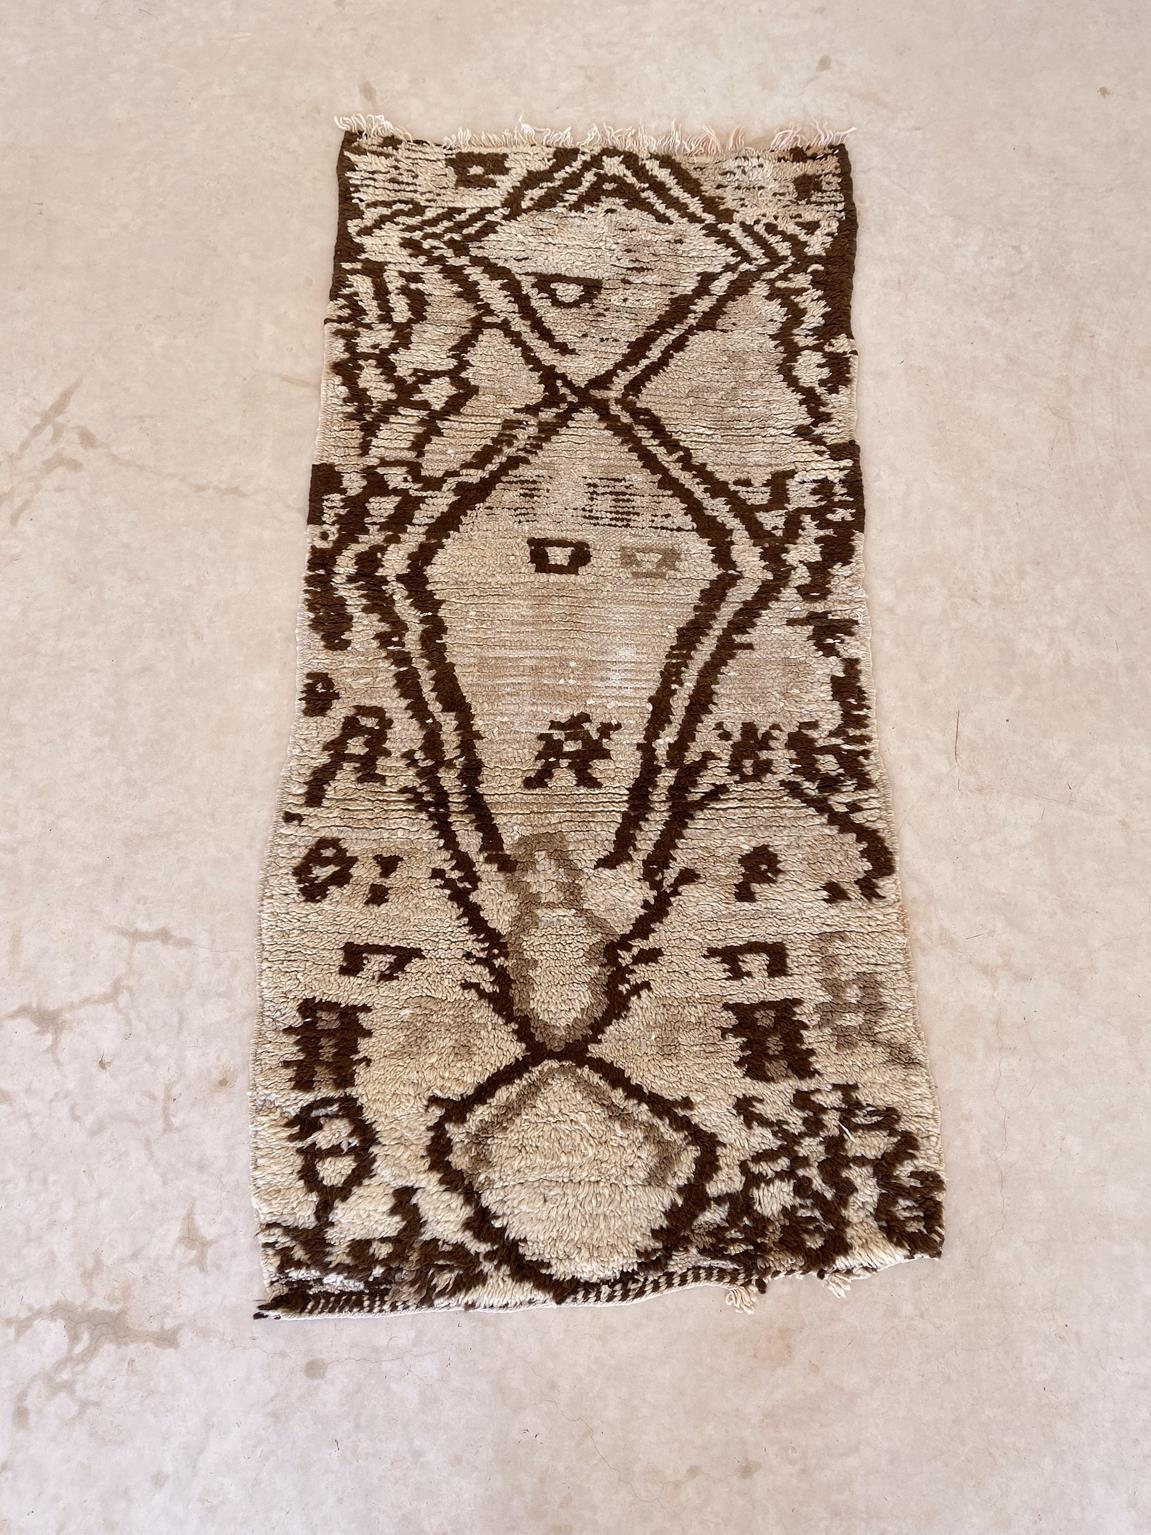 I selected this lovely rug from piles of carpets as I have always loved a good vintage Azilal rug in the beige and brownish tones! This one shows warm colors and a little rustic feel with abstract designs that are probably about giving birth, which